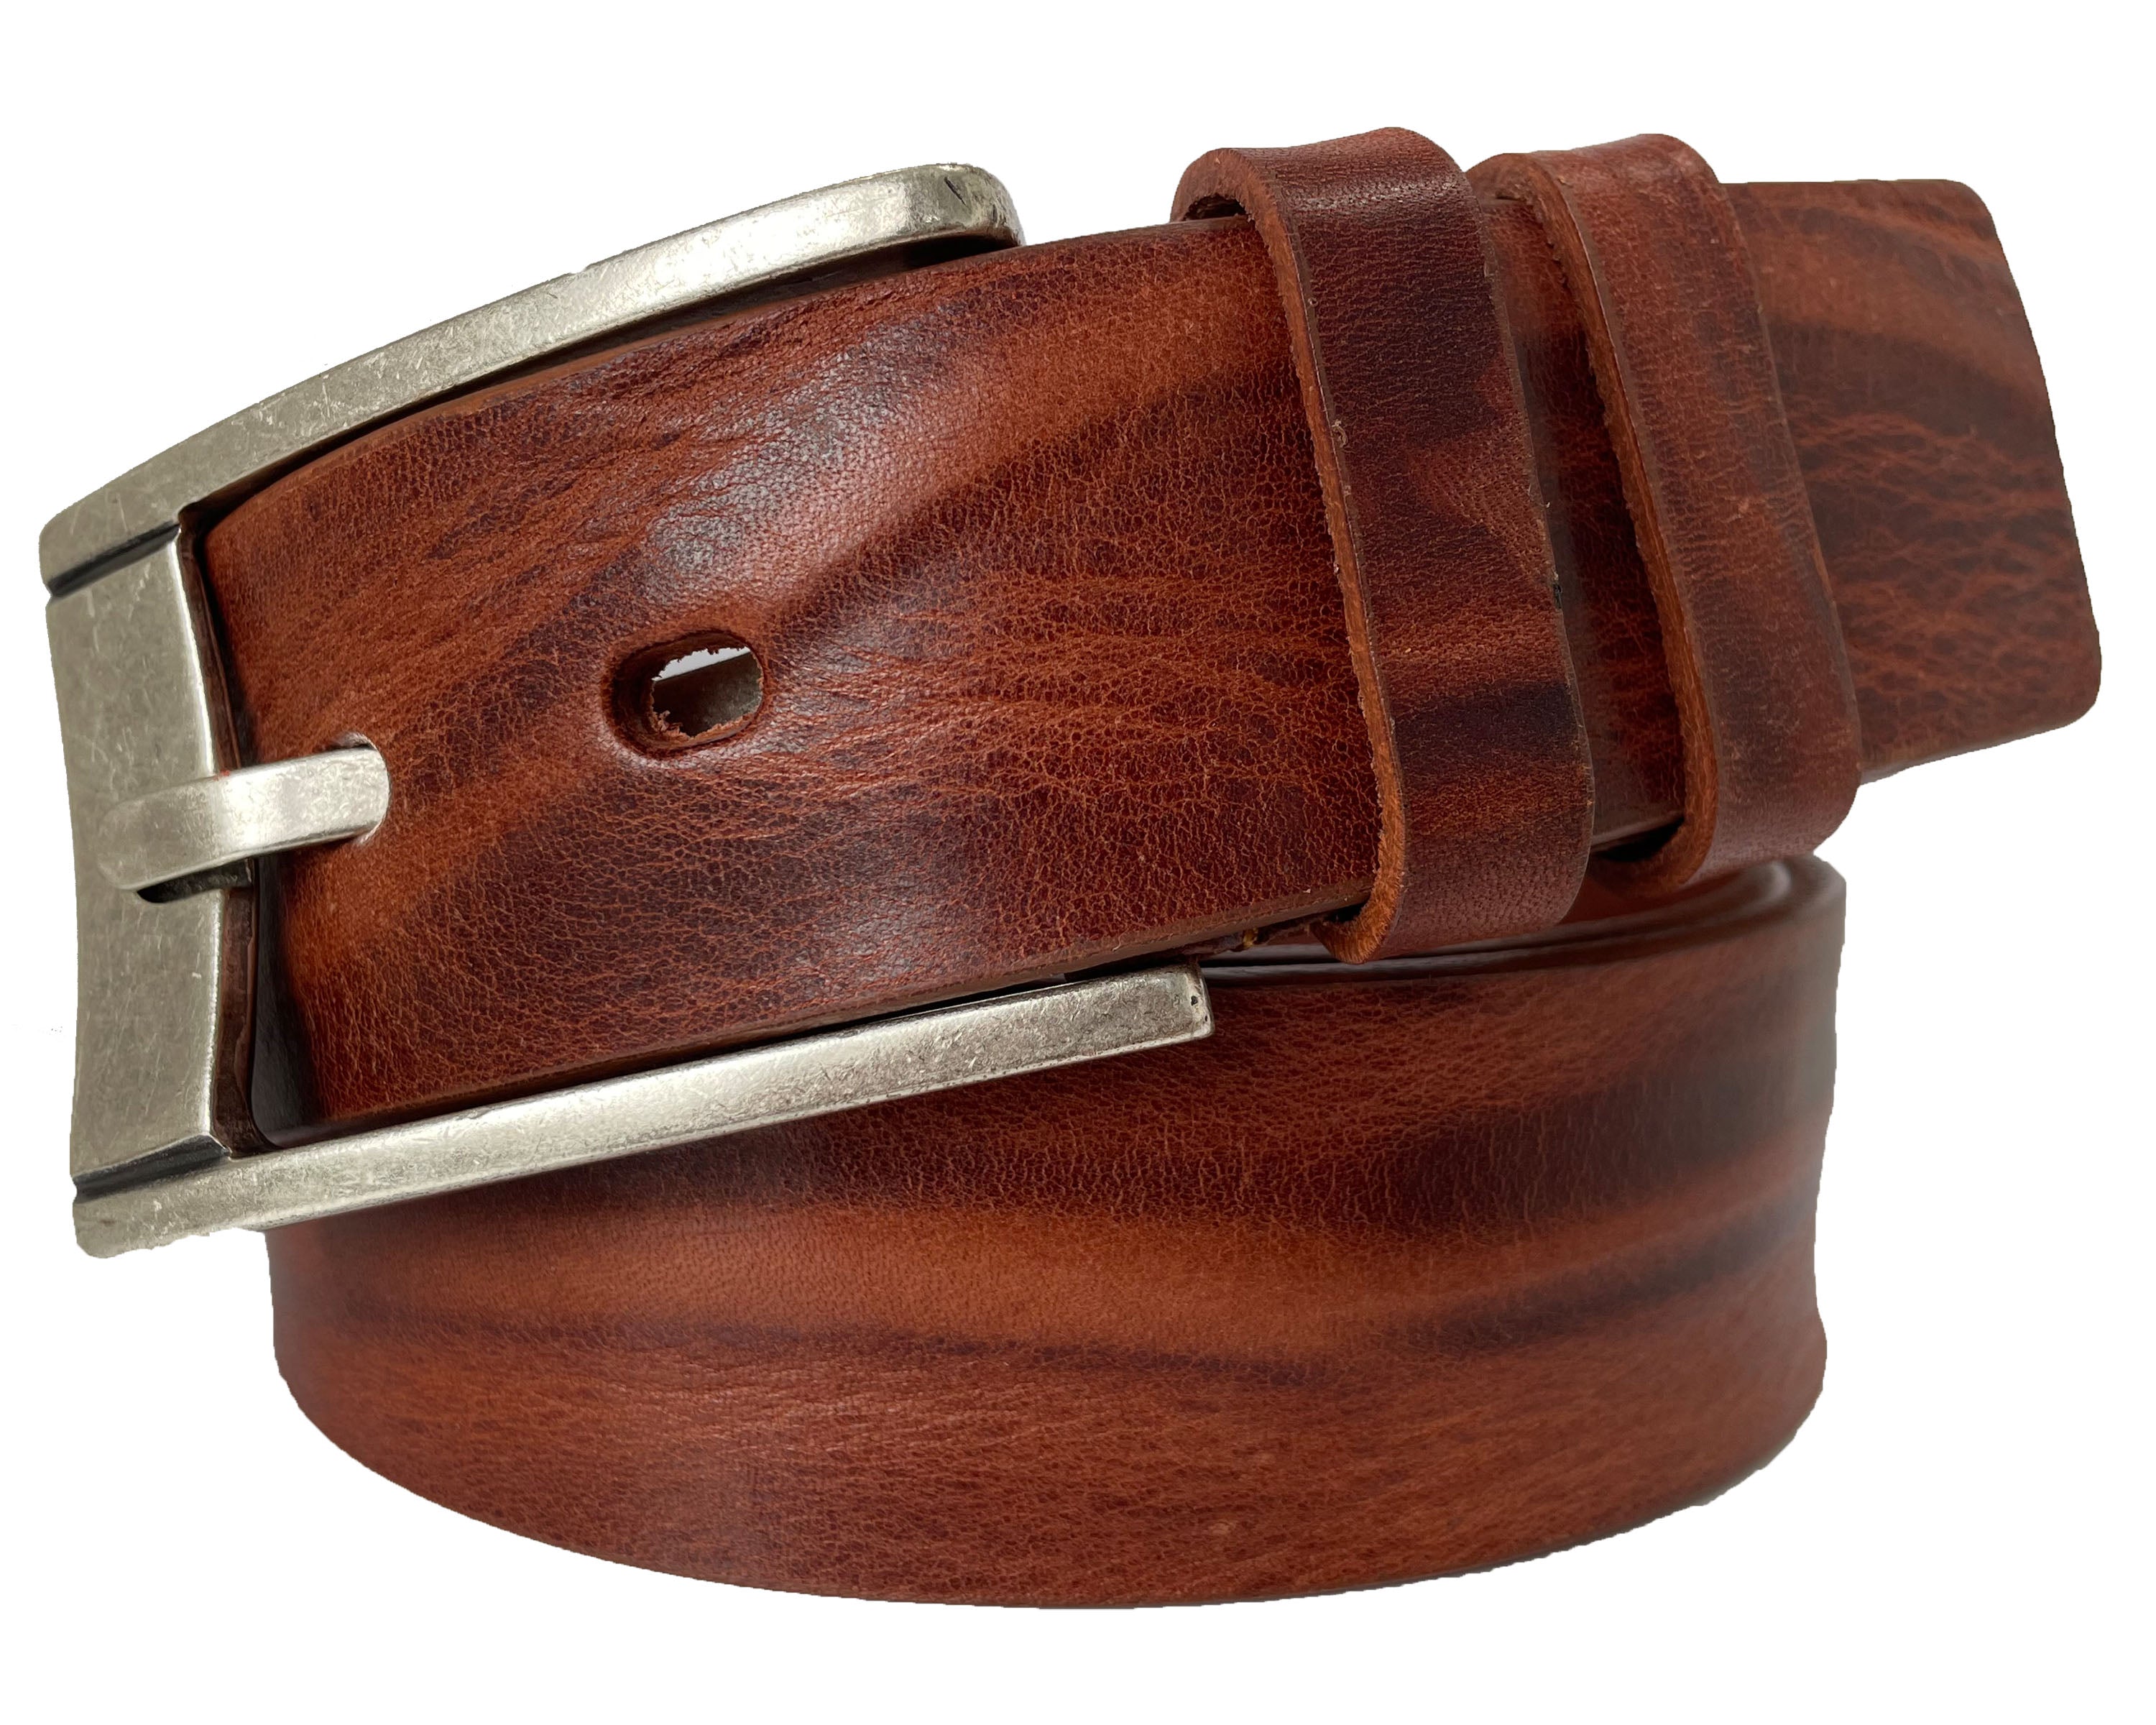 COGNAC TAN TWO TONE STONEWASHED  40MM HIDE LEATHER BELT